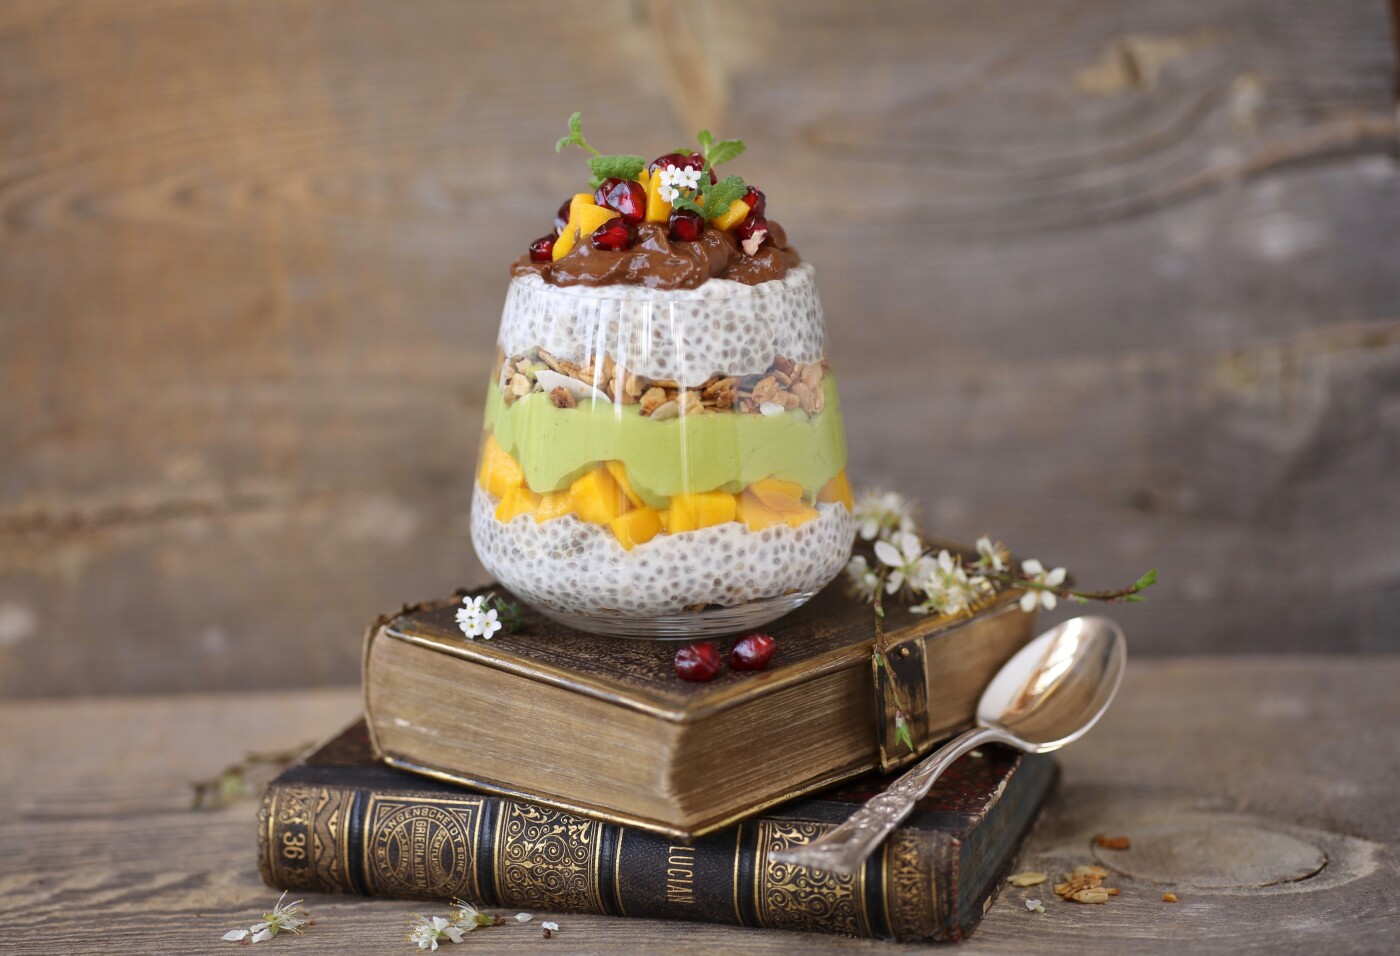 In this picture is Vegan chia pudding with mousse: green one is made from avocado and banana, brown one with addiction of cocoa. Sweetened with honey and topped with fruits.